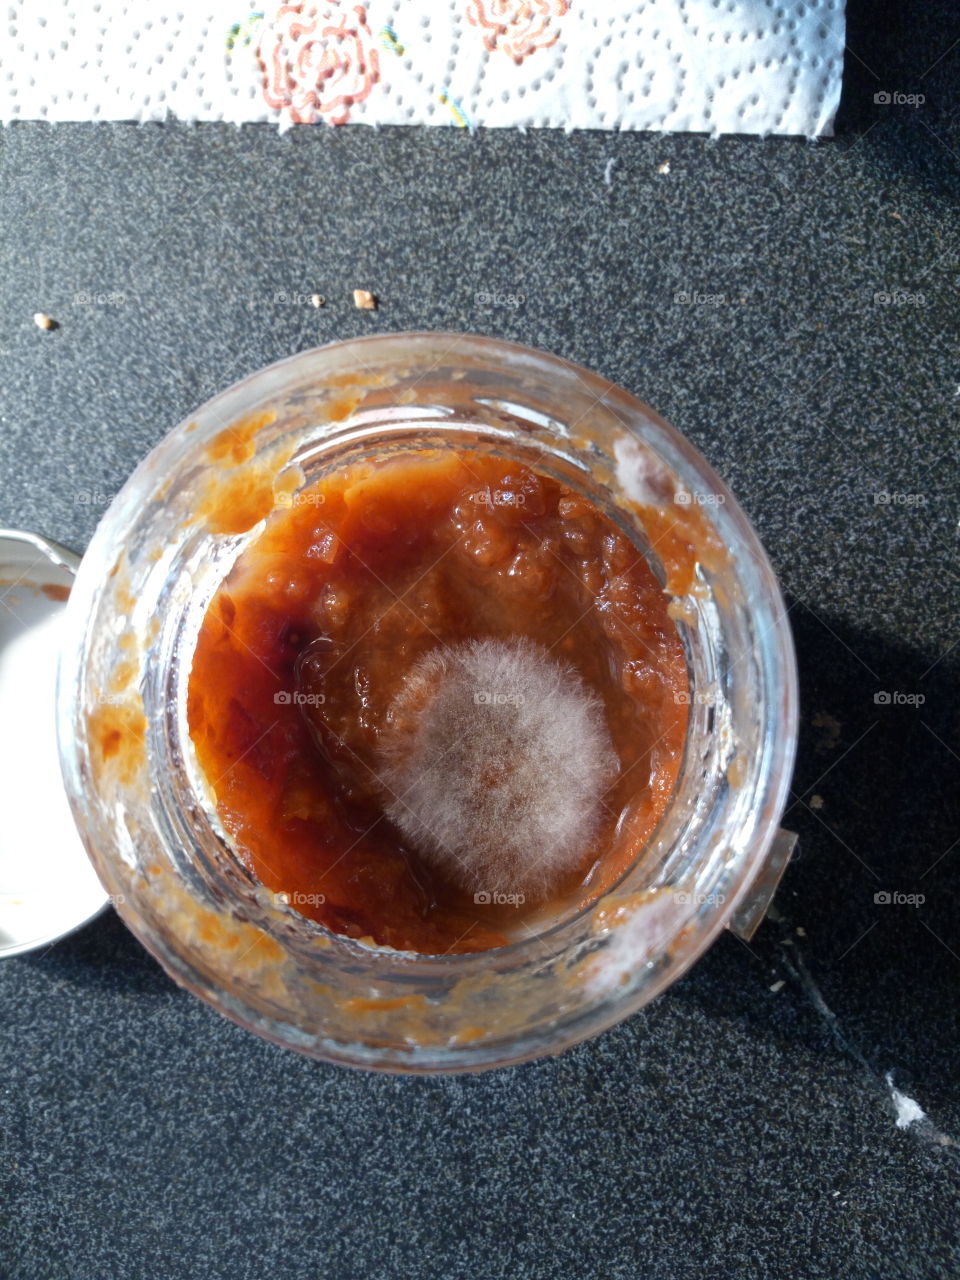 marmalade with mold